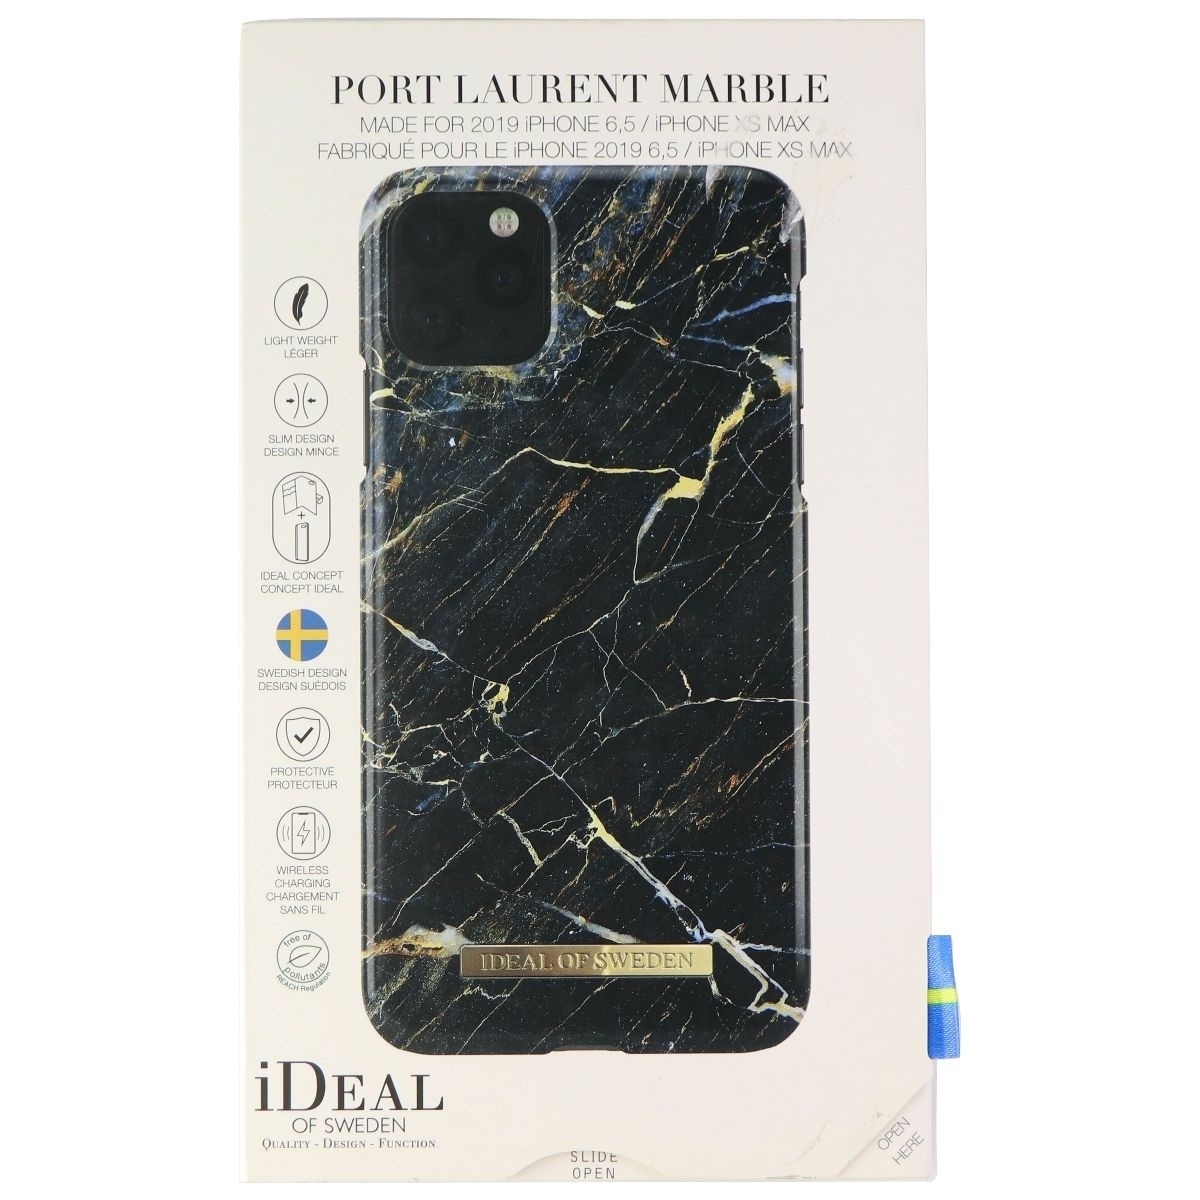 IDeal Of Sweden Hard Case For IPhone 11 Pro Max / Xs Max - Port Laurent Marble